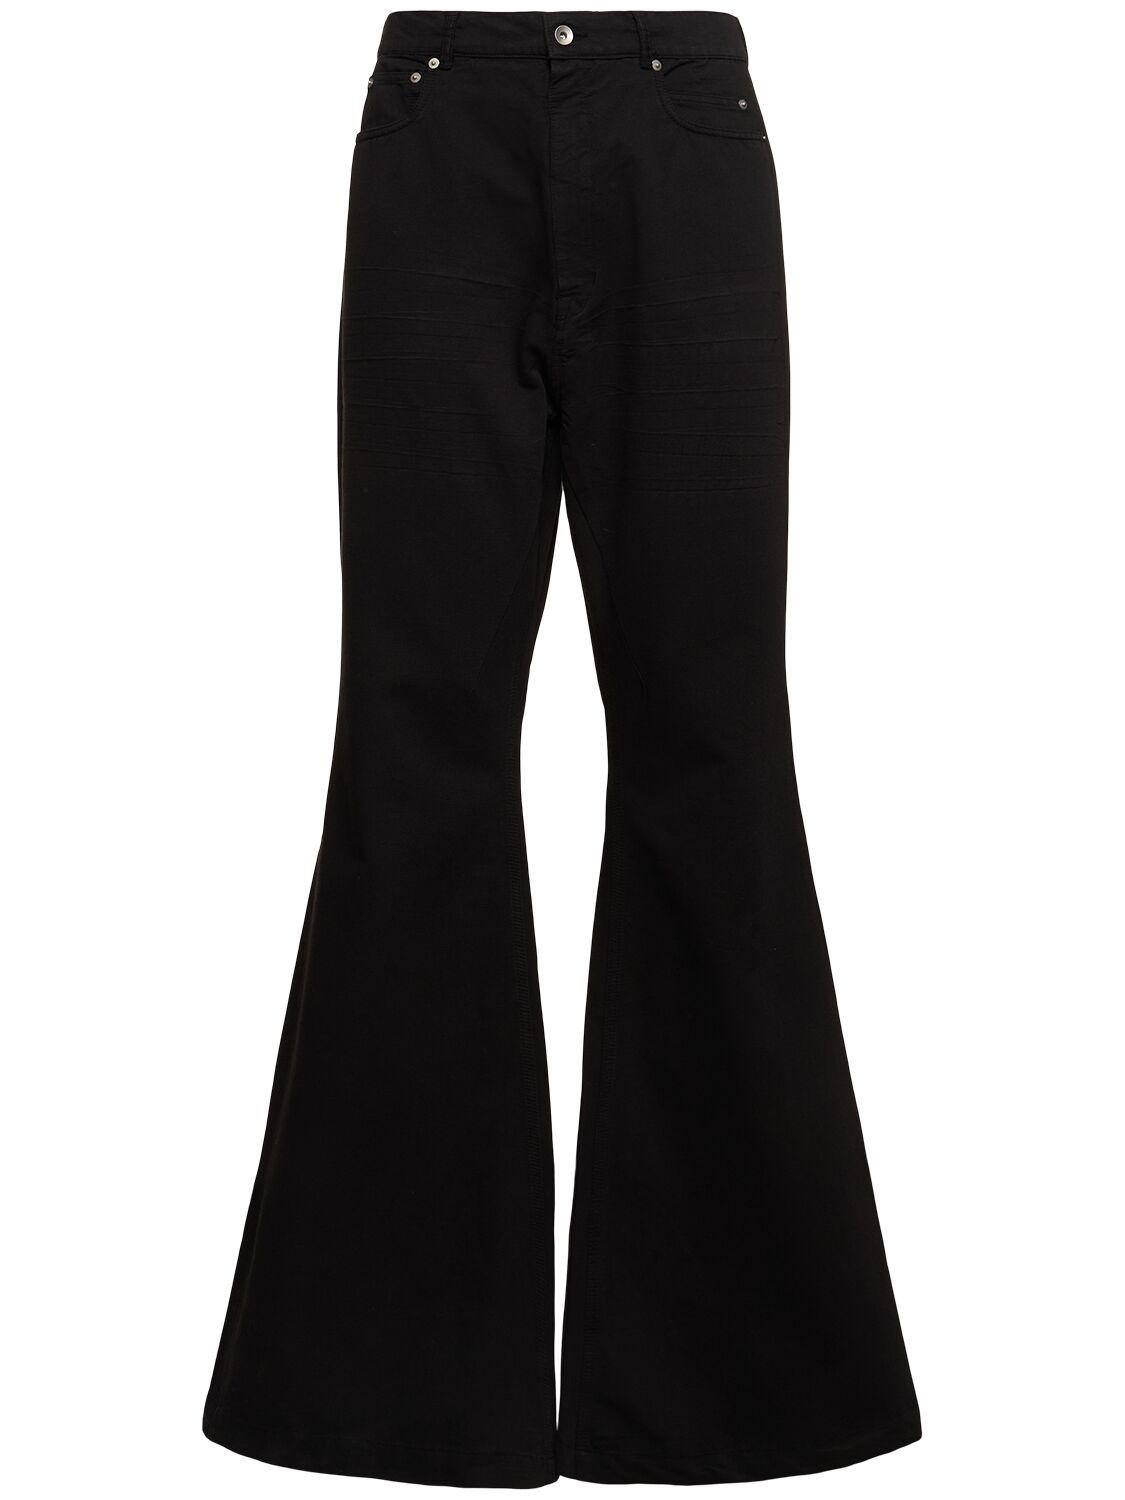 Bolan Bootcut Jeans by RICK OWENS DRKSHDW